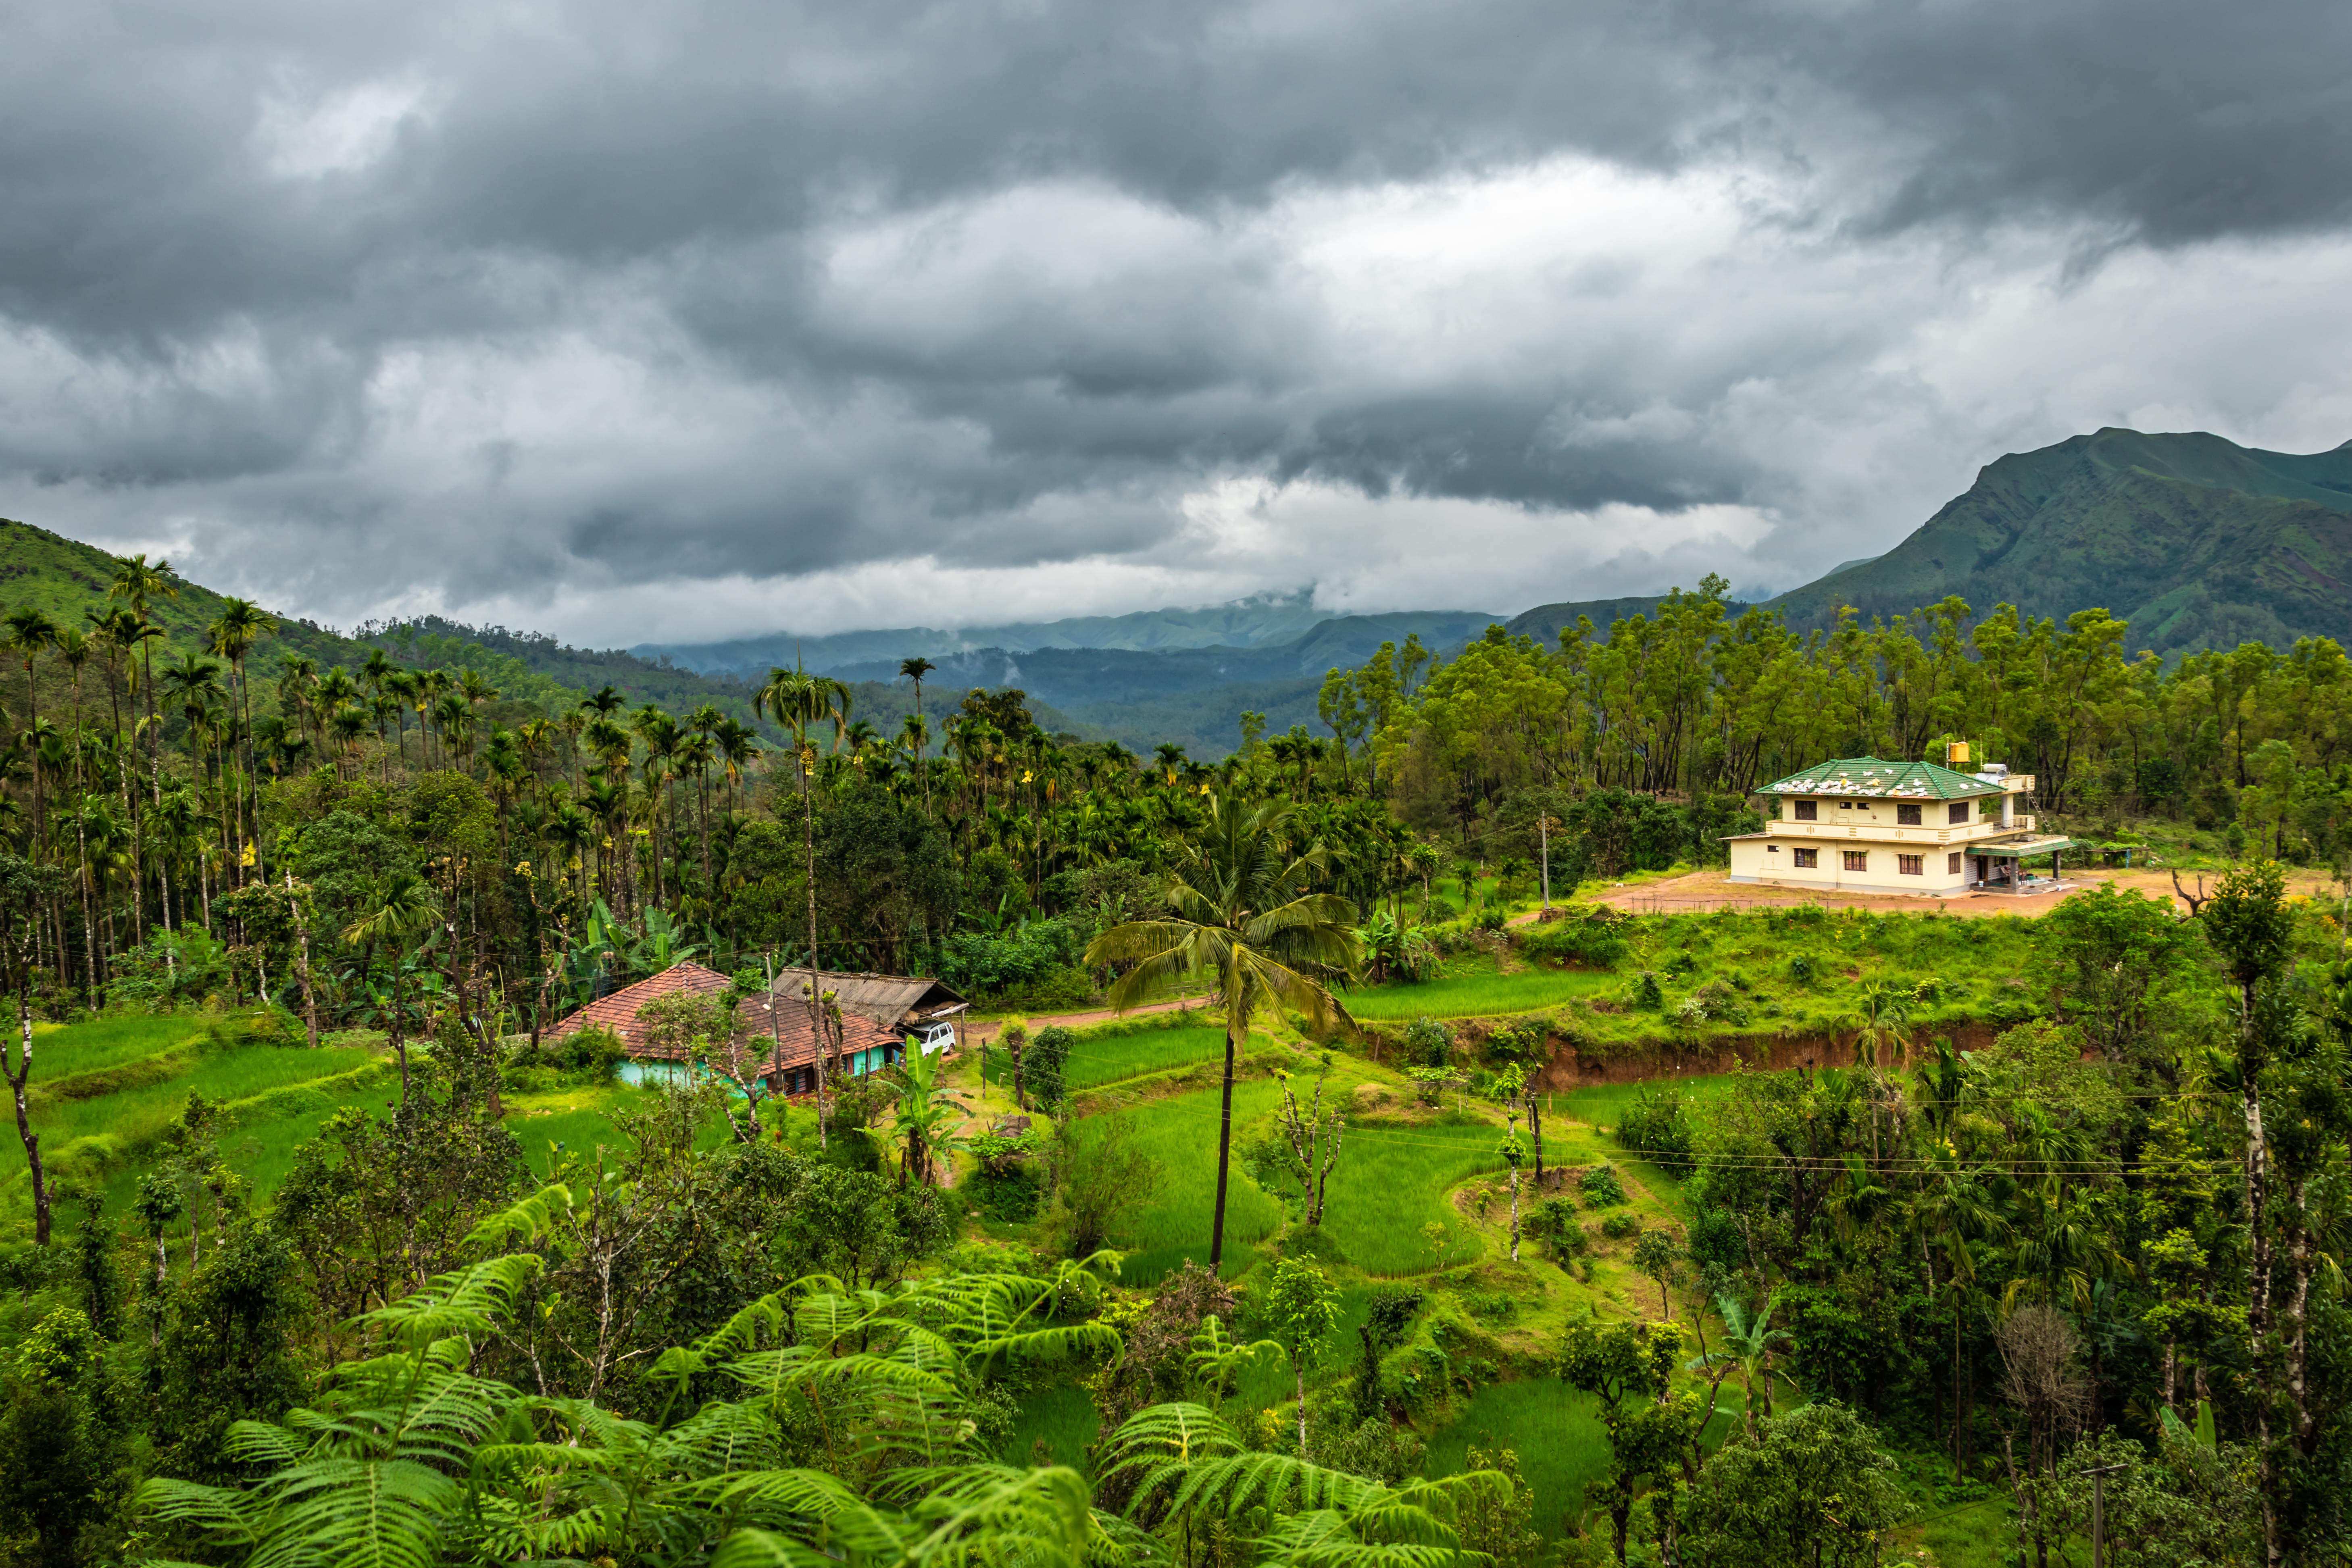 Coorg - a feast for the senses, with its lush greenery, aromatic coffee, and spicy cuisine